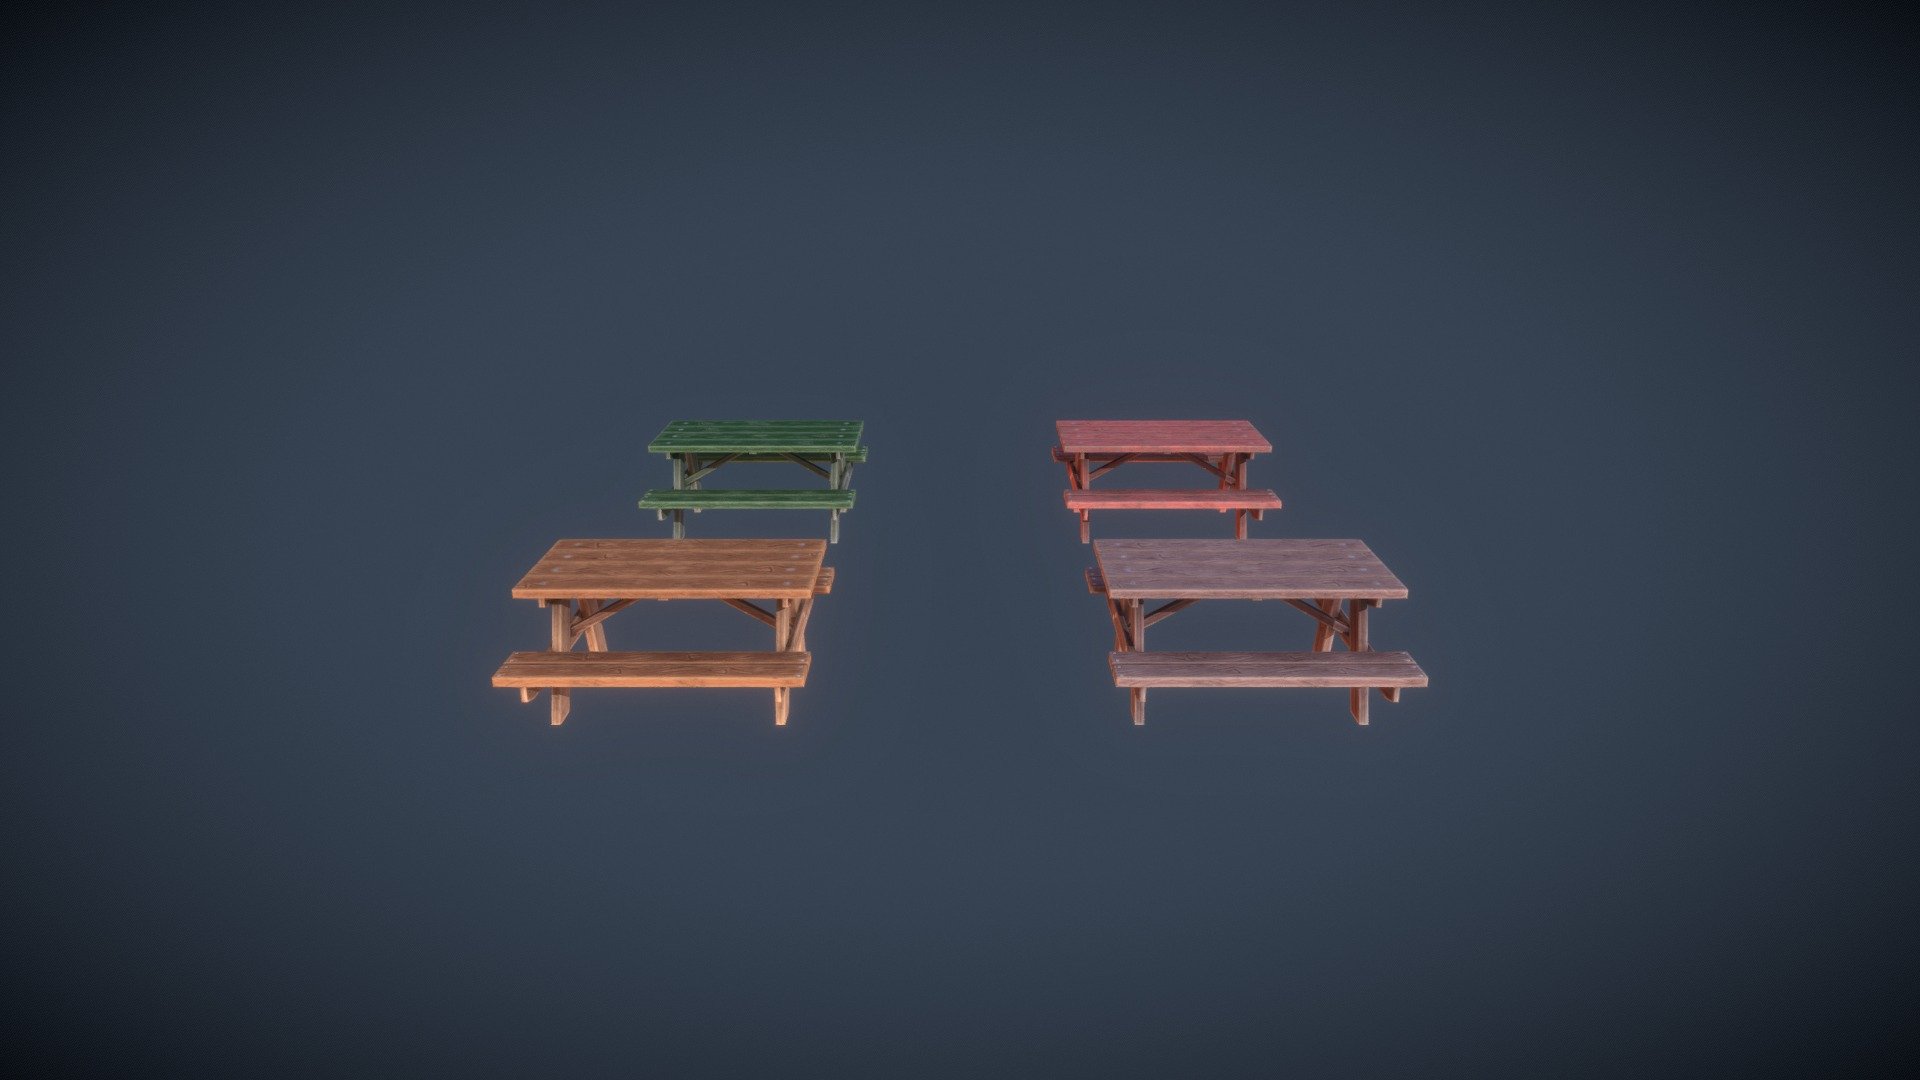 Stylized low poly wood picnic table PRB game ready. 4 colors.




File format: .fbx 

1 table : 200 vertices / 162 faces

Textures : 2048x2048 with Basecolor / Height / Metallic / Roughness / Normal (opengl and directx) / Ambiant occlusion

PRB (metallic roughness), Unity URP (metallic standard), Unreal 4 (packed) textures

If You want different texture export settings - write to me, I will be happy to help! Hope you'll like it! - Low poly stylized Picnic Table - Buy Royalty Free 3D model by zivjeli 3d model